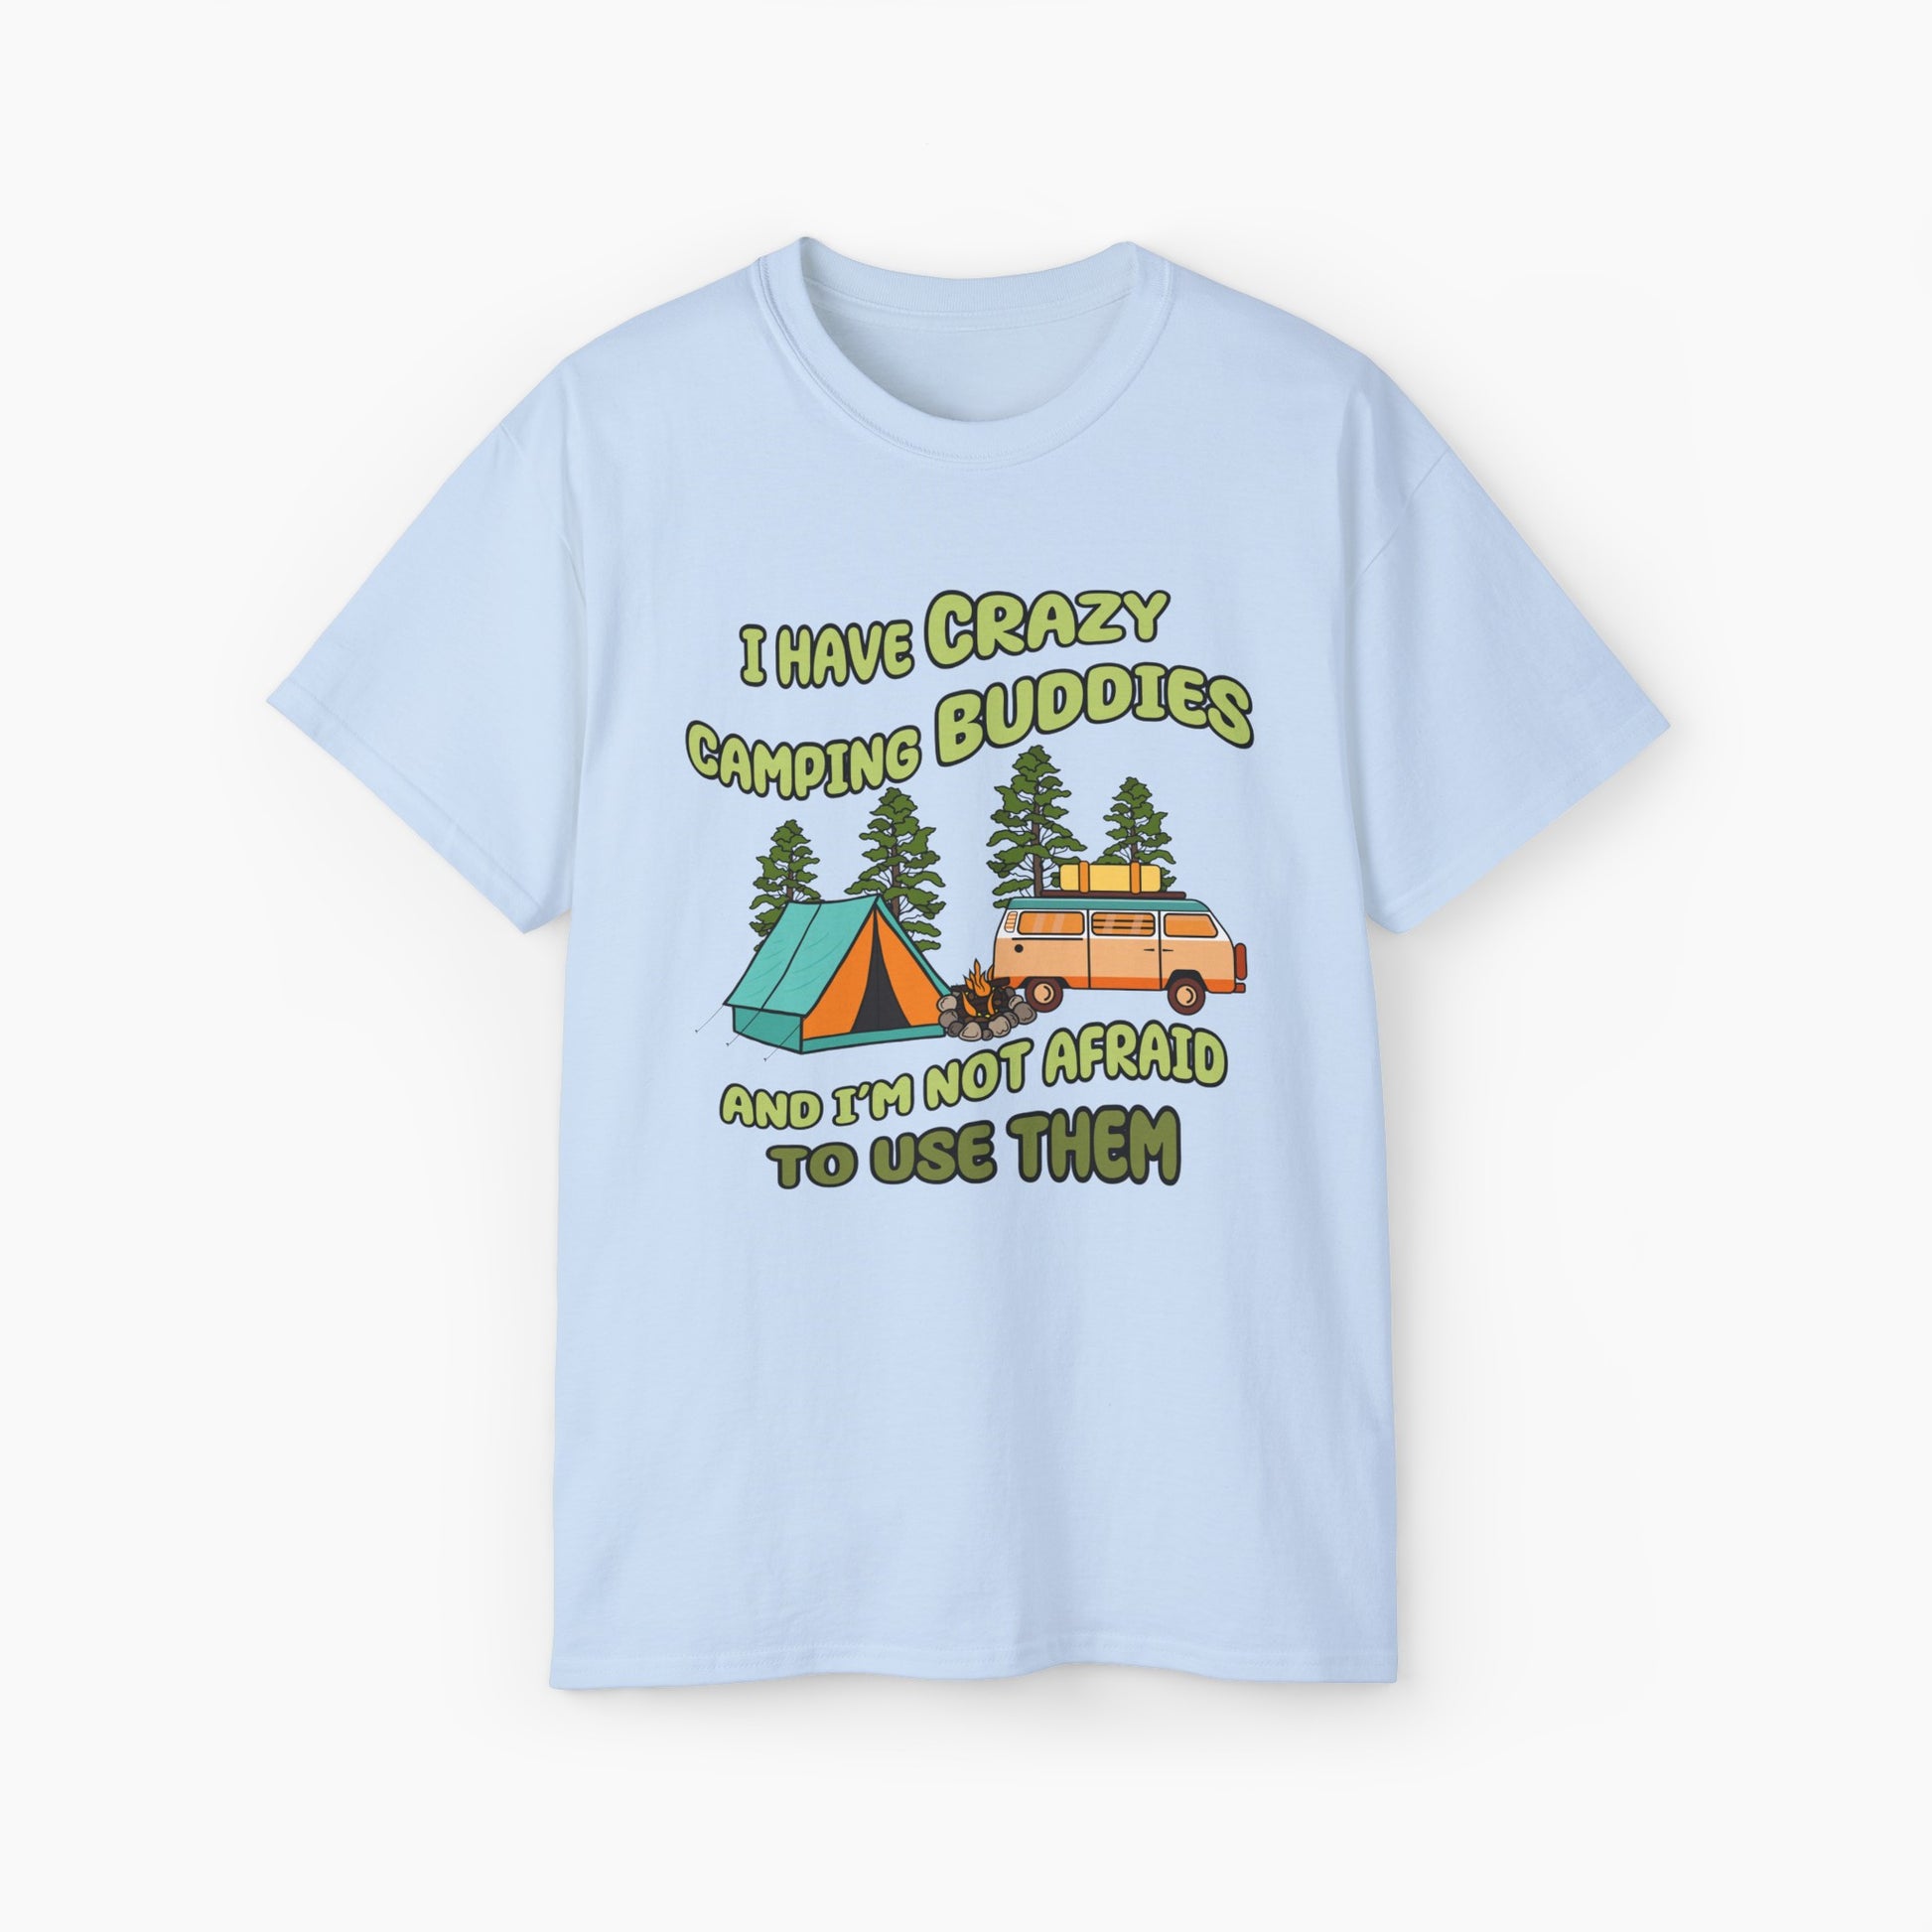 Light blue t-shirt with the text 'I have crazy camping buddies and I am not afraid to use them,' featuring a camping van, campfire, trees, and a tent."